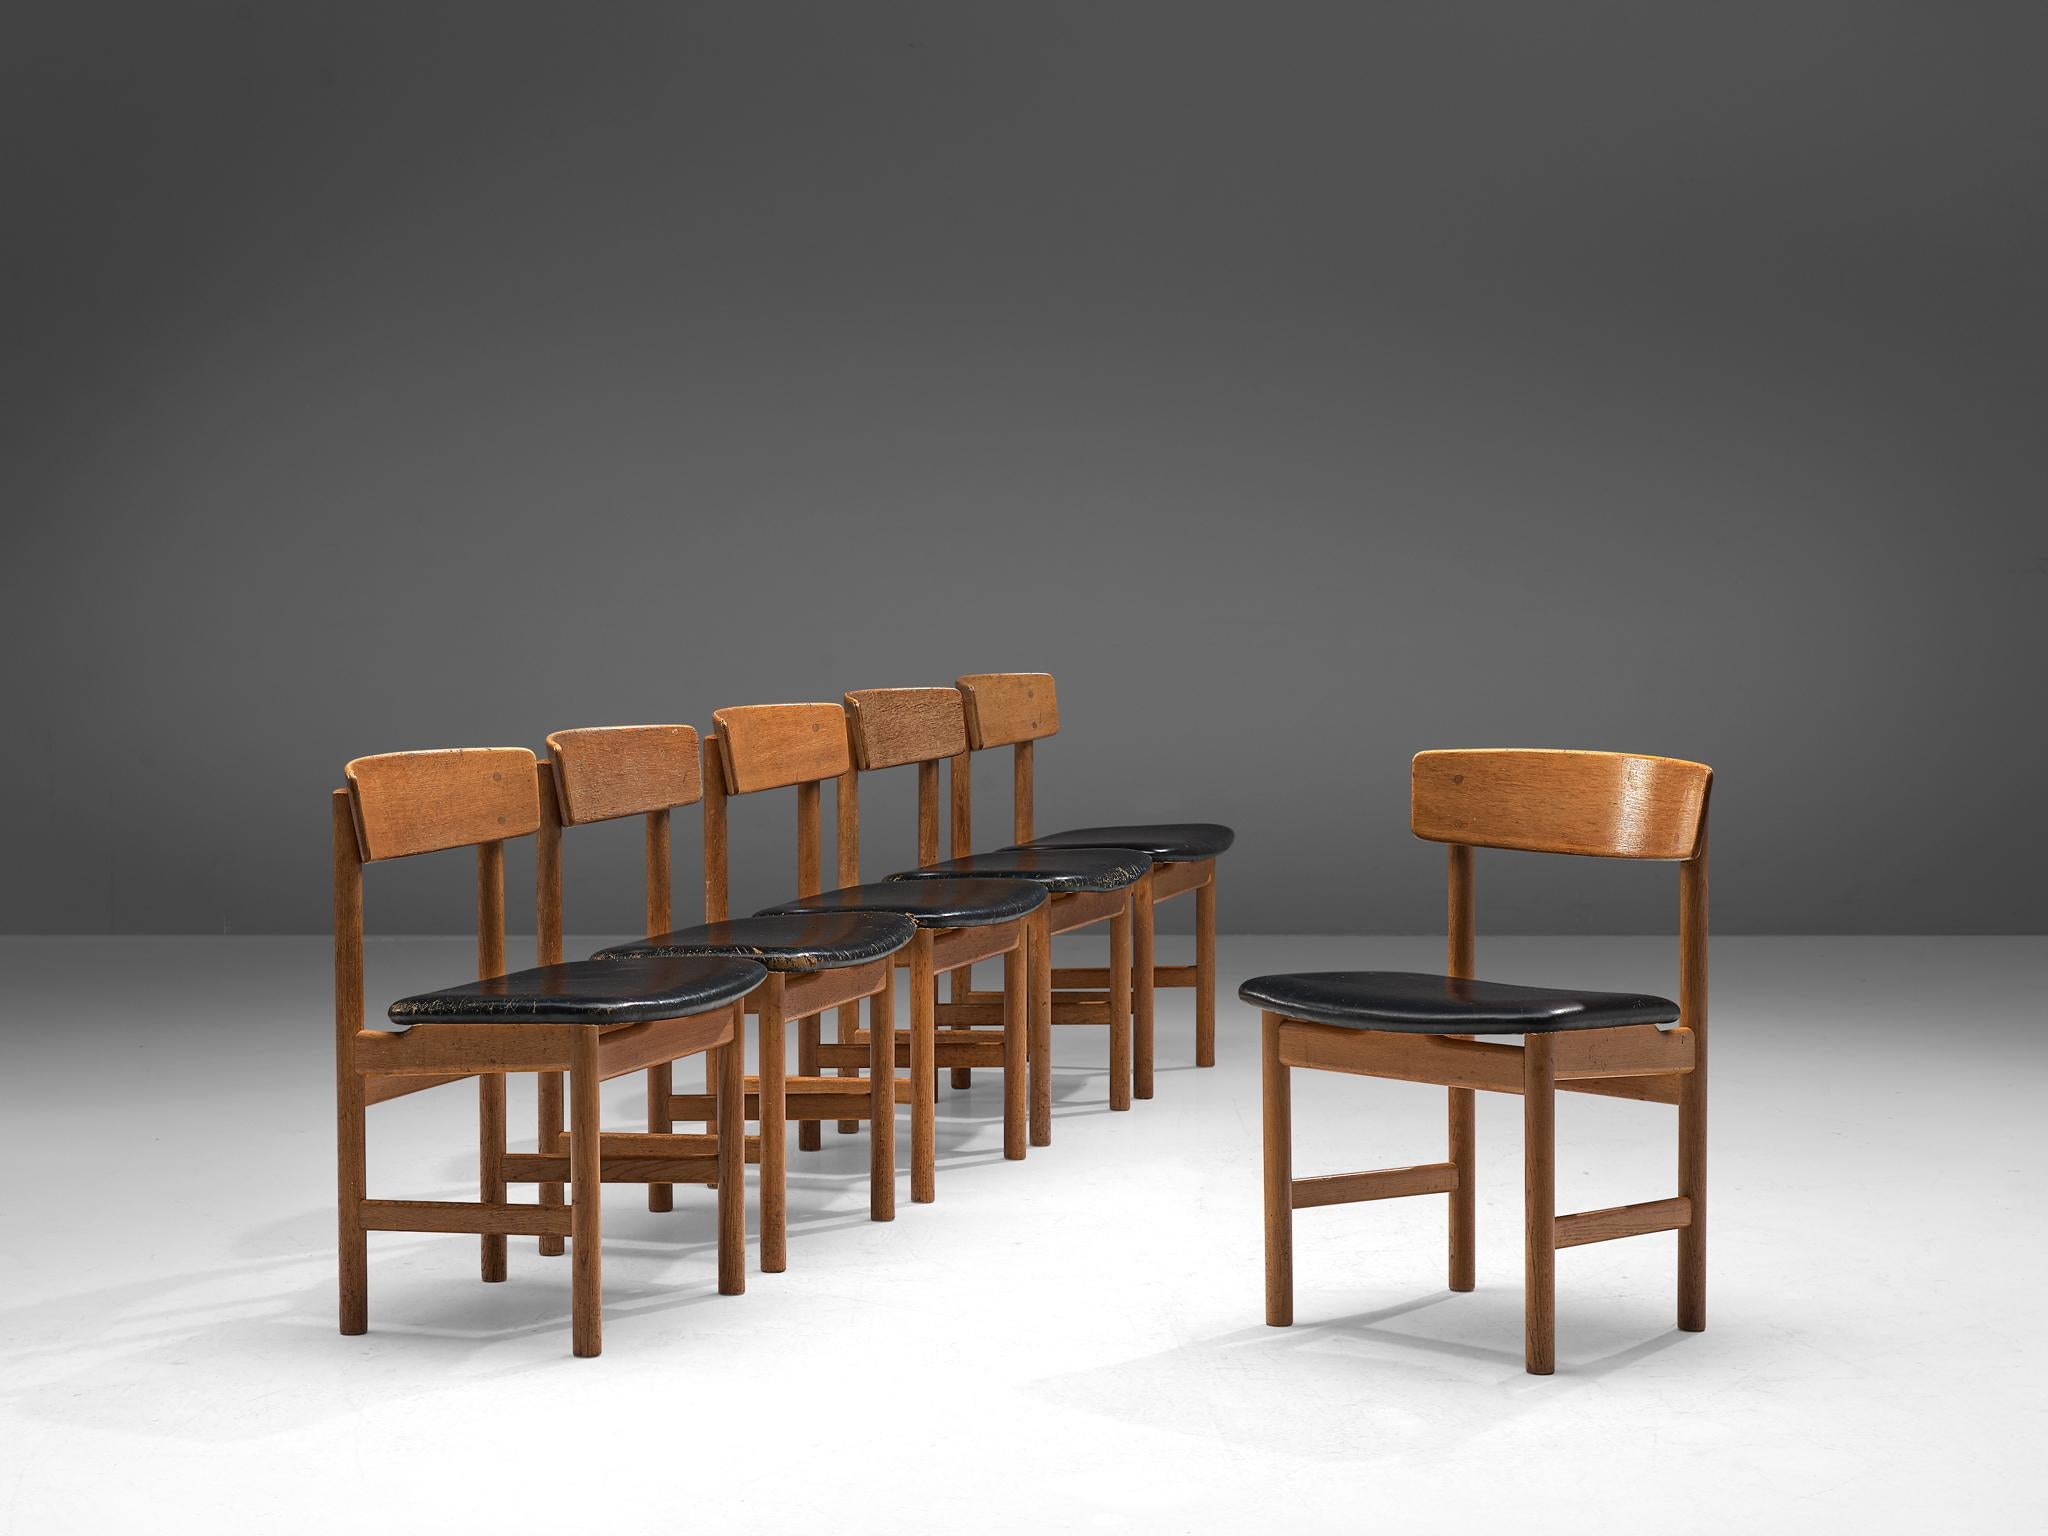 Børge Mogensen for Fredericia Stolefabrik, set of 6 chairs model 3236, oak and leather, Denmark, 1960s.

Set of six dining chairs in oak and black leather upholstery. These chairs show beautiful lines in their modest appearance. The back features